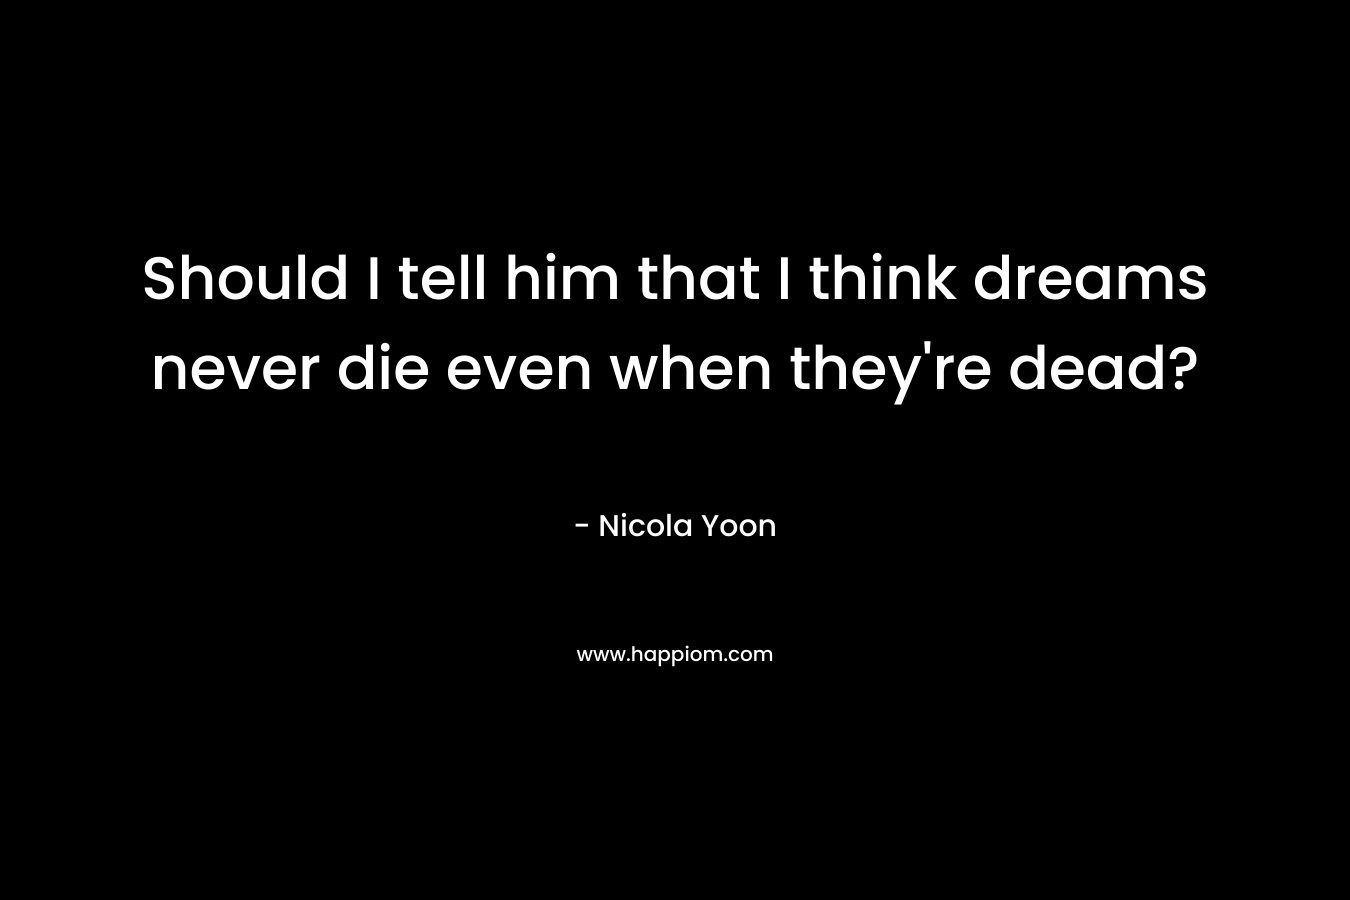 Should I tell him that I think dreams never die even when they're dead?